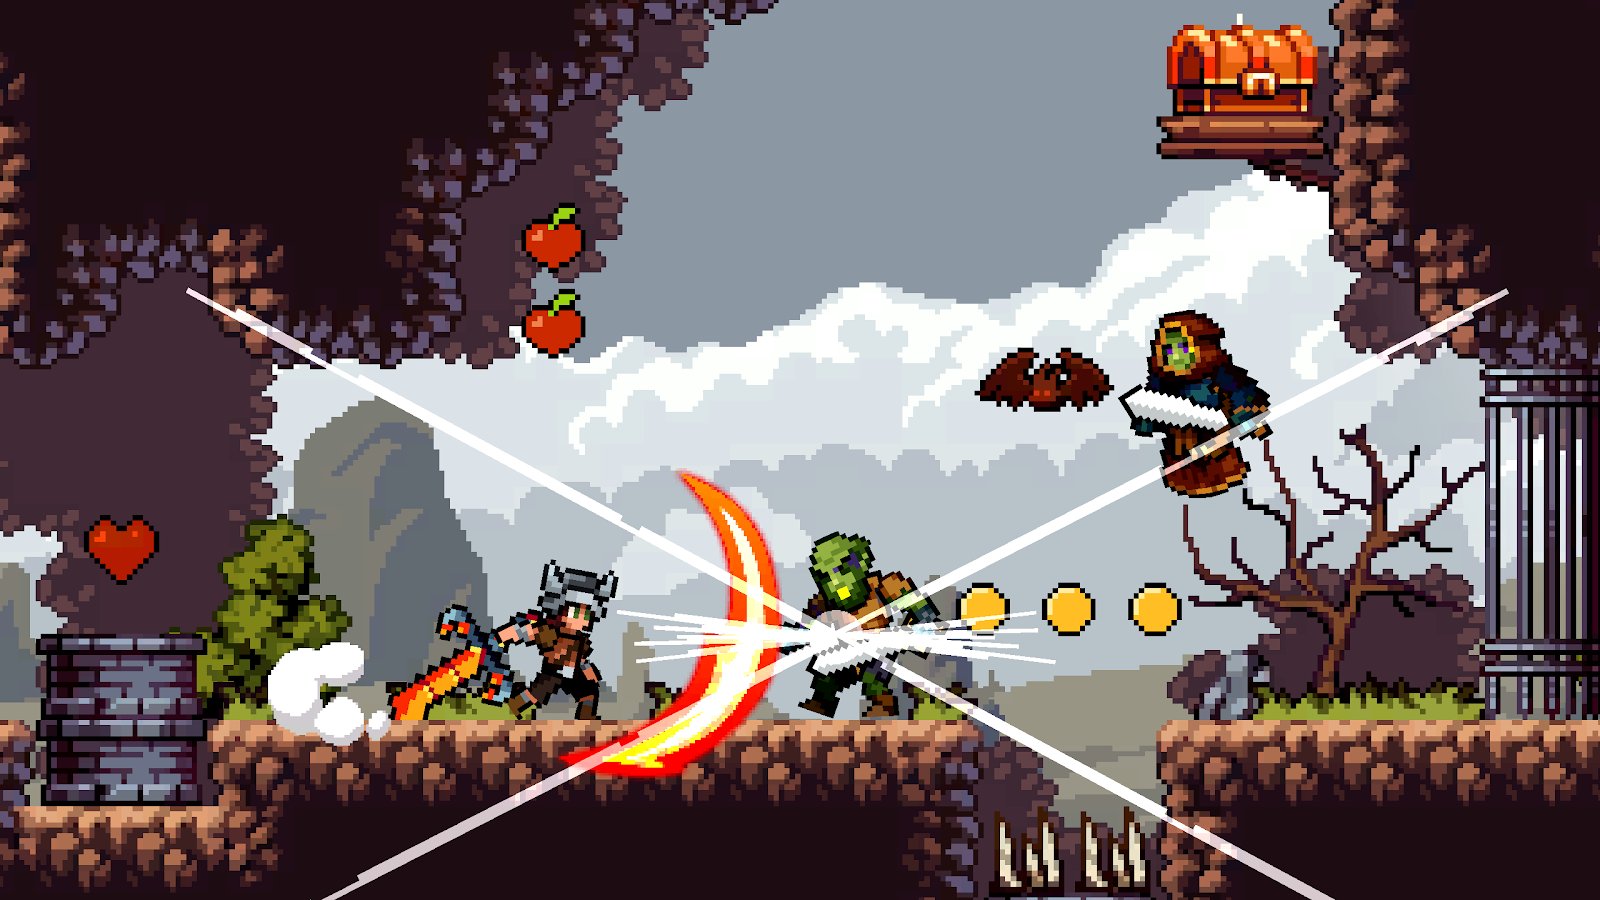 Apple Knight APK Download for Android Free